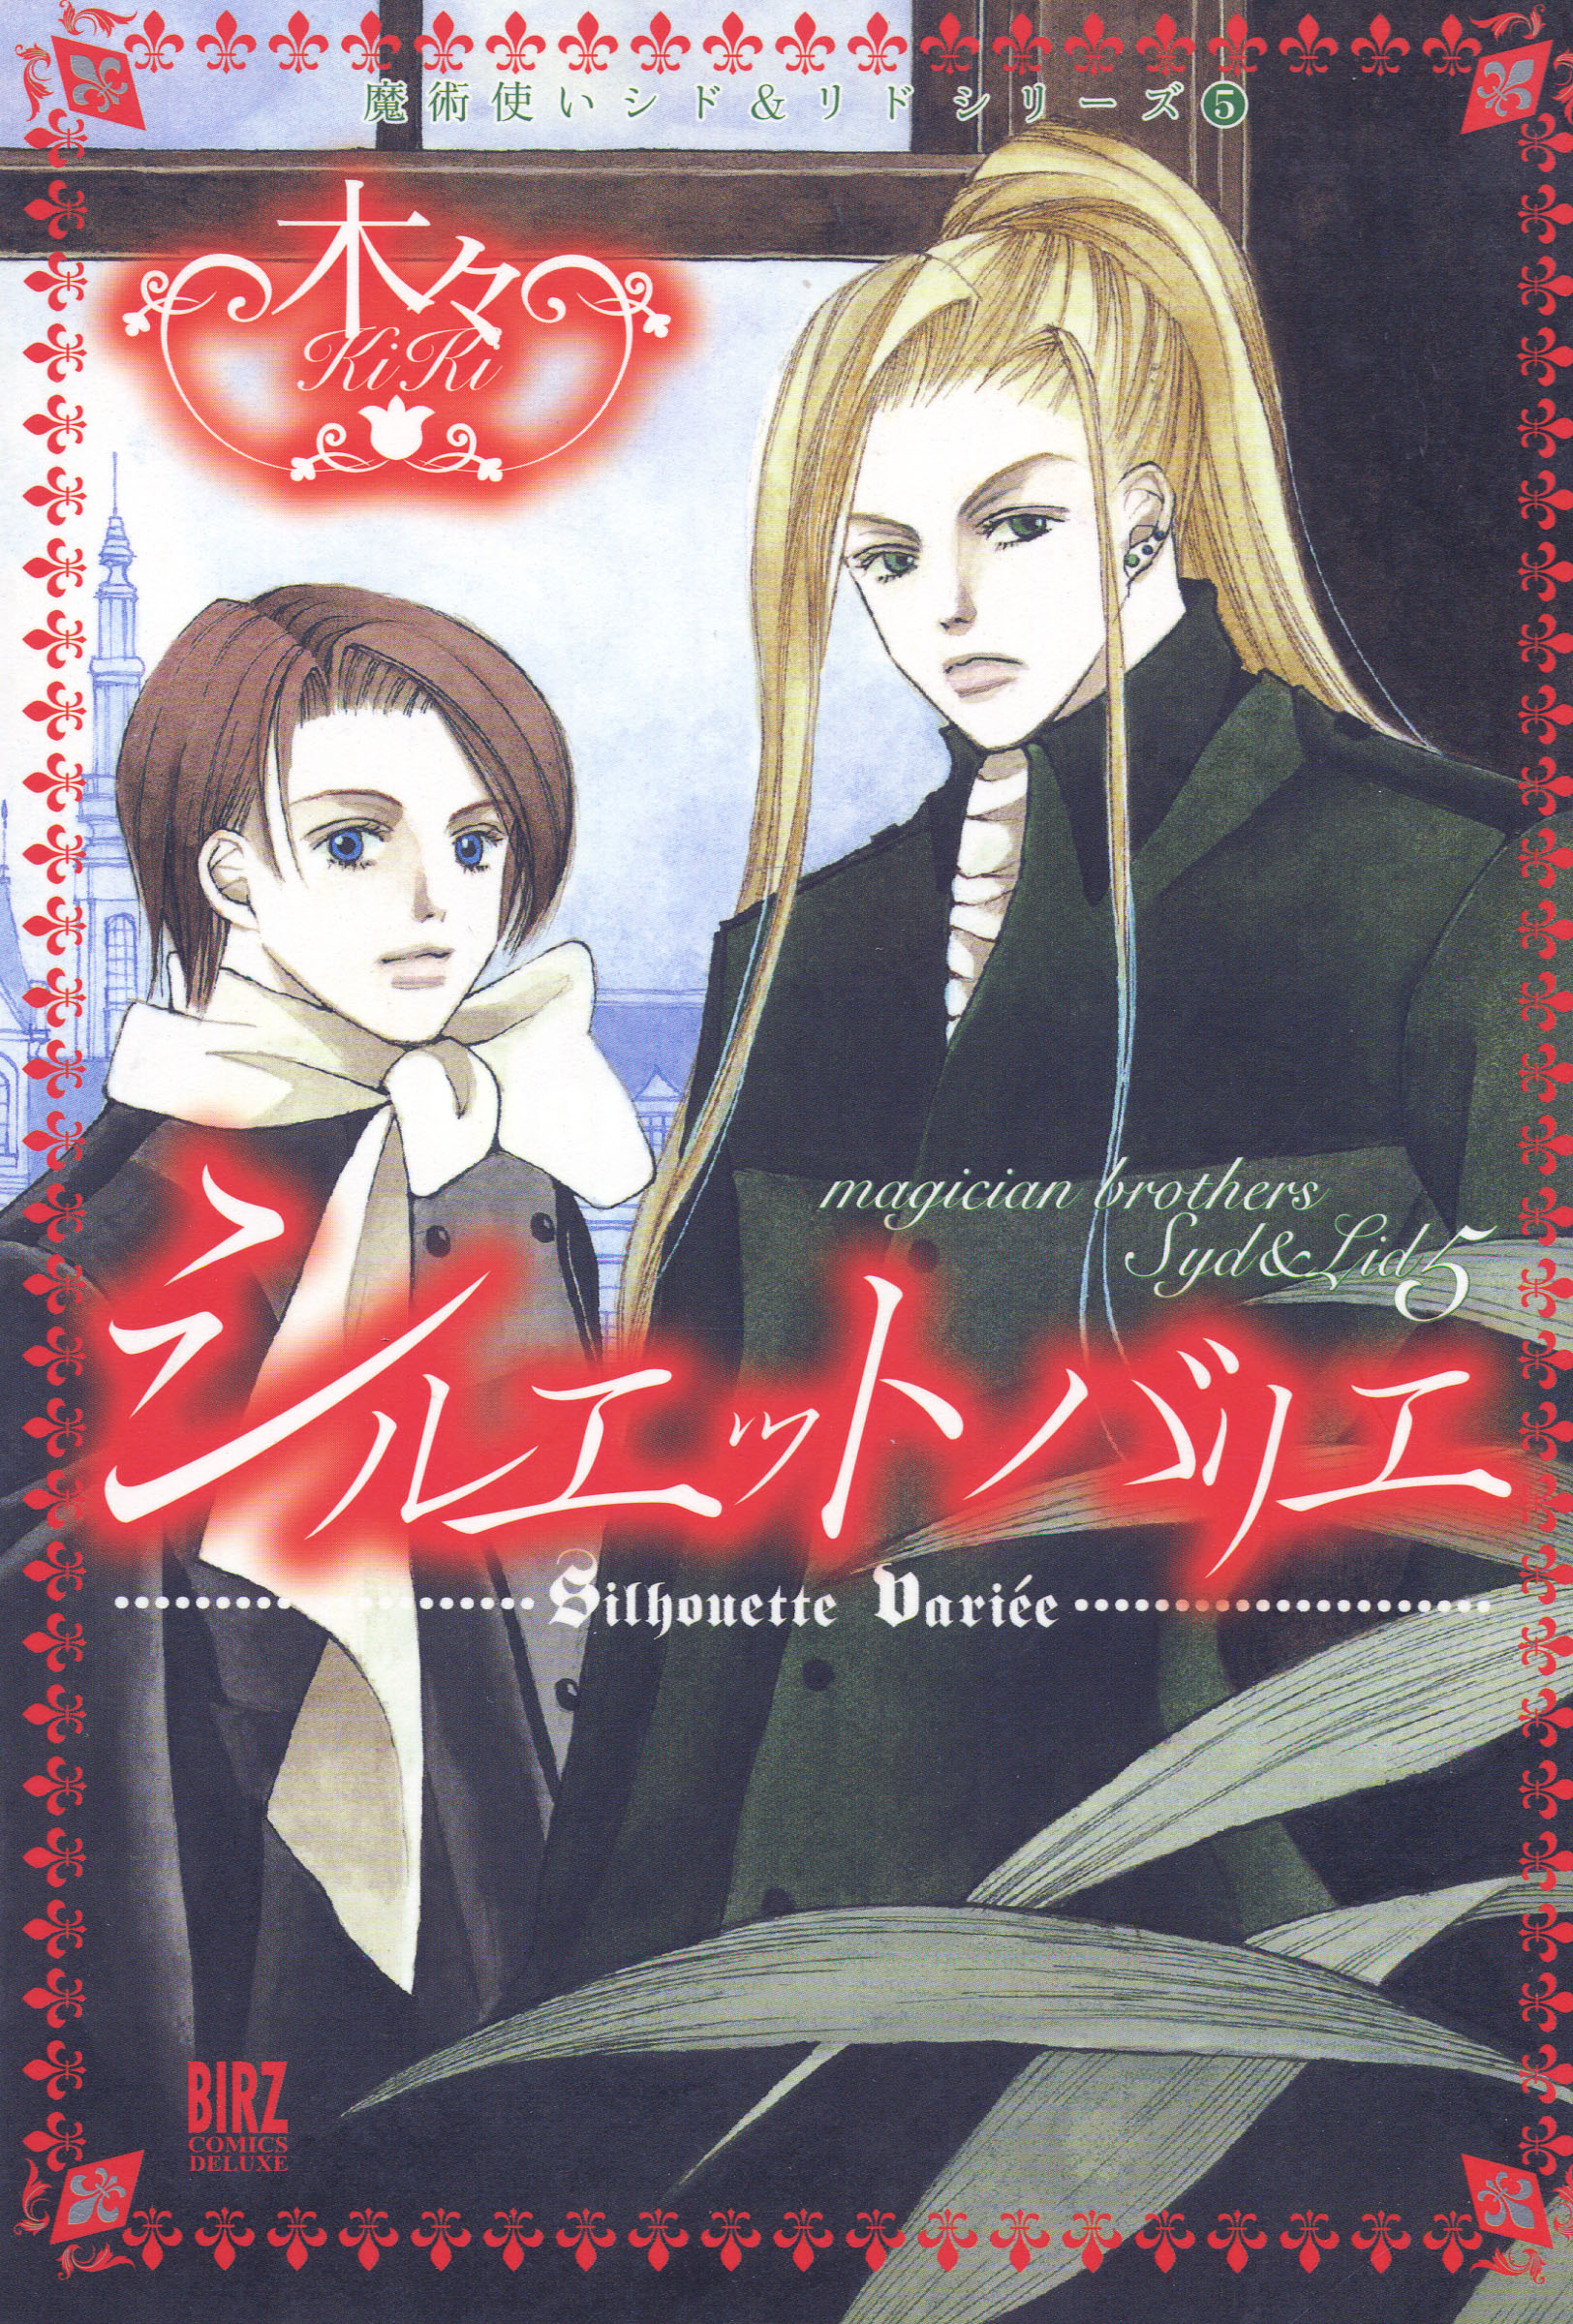 Silhouette Variee - Magician Brothers Syd & Lid 5 (Yaoi Manga)